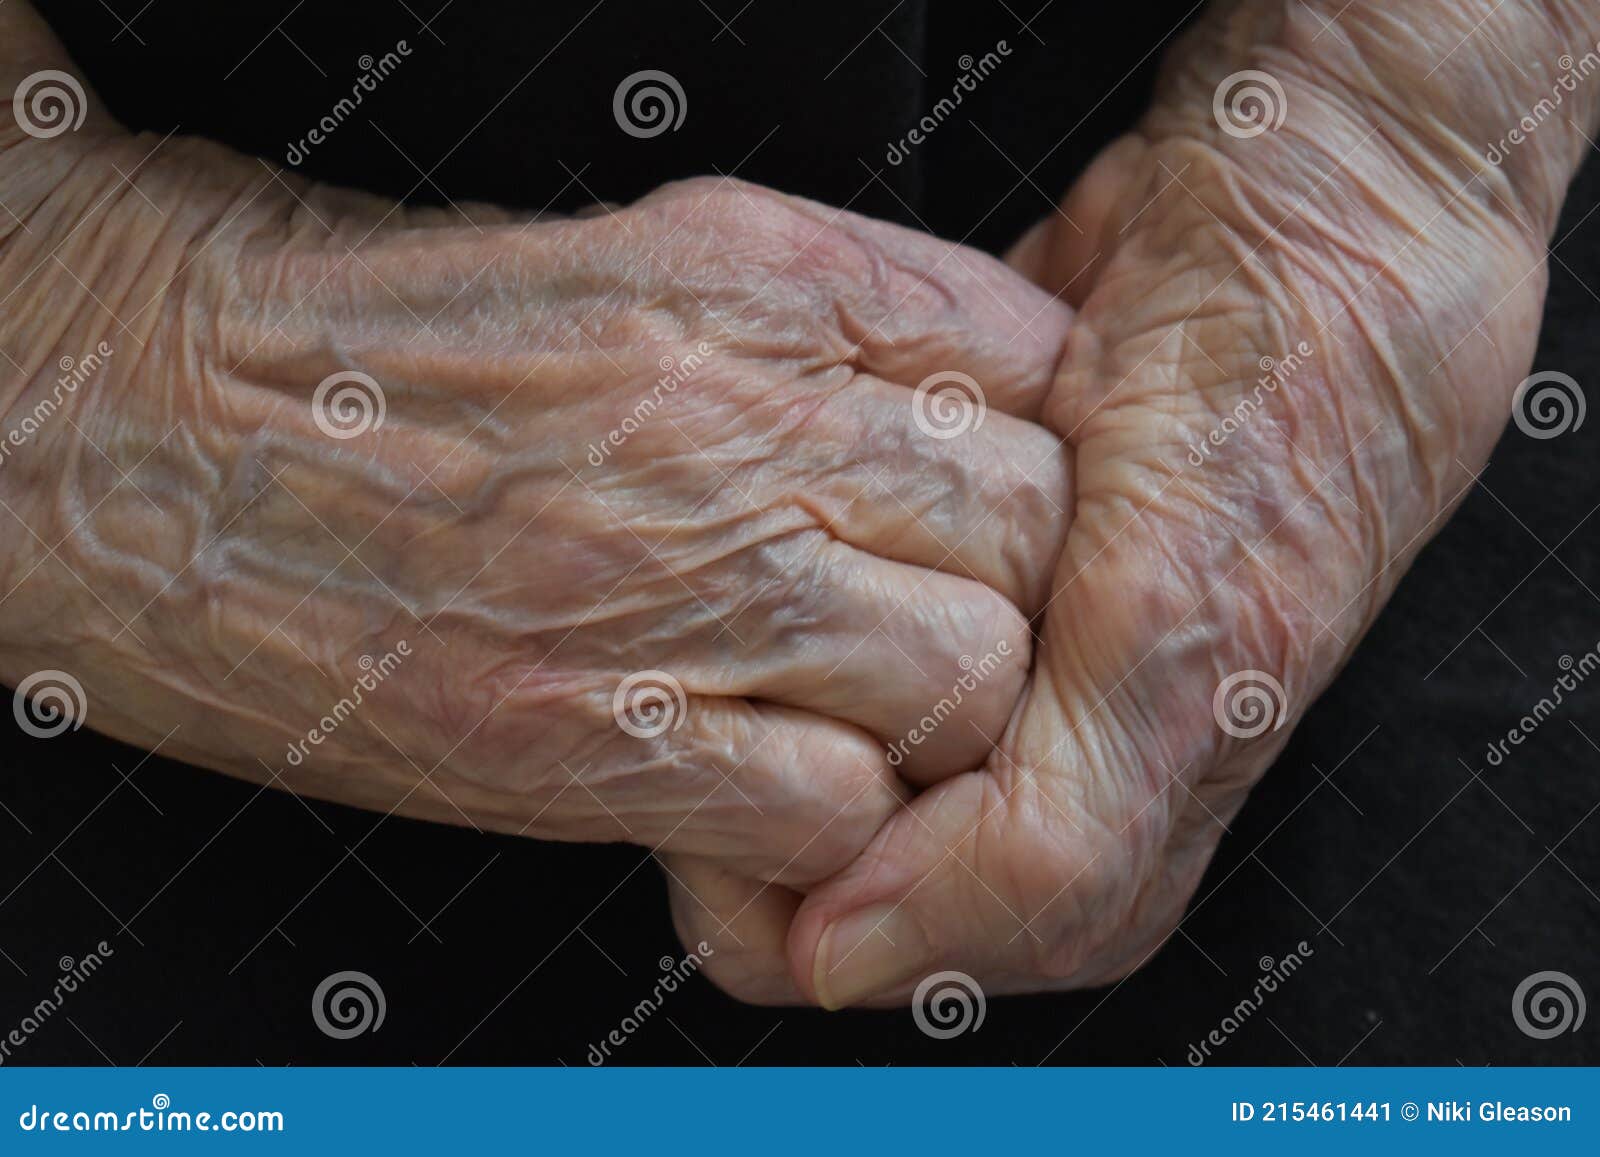 wrinkled and old grandmother's hands clasped together